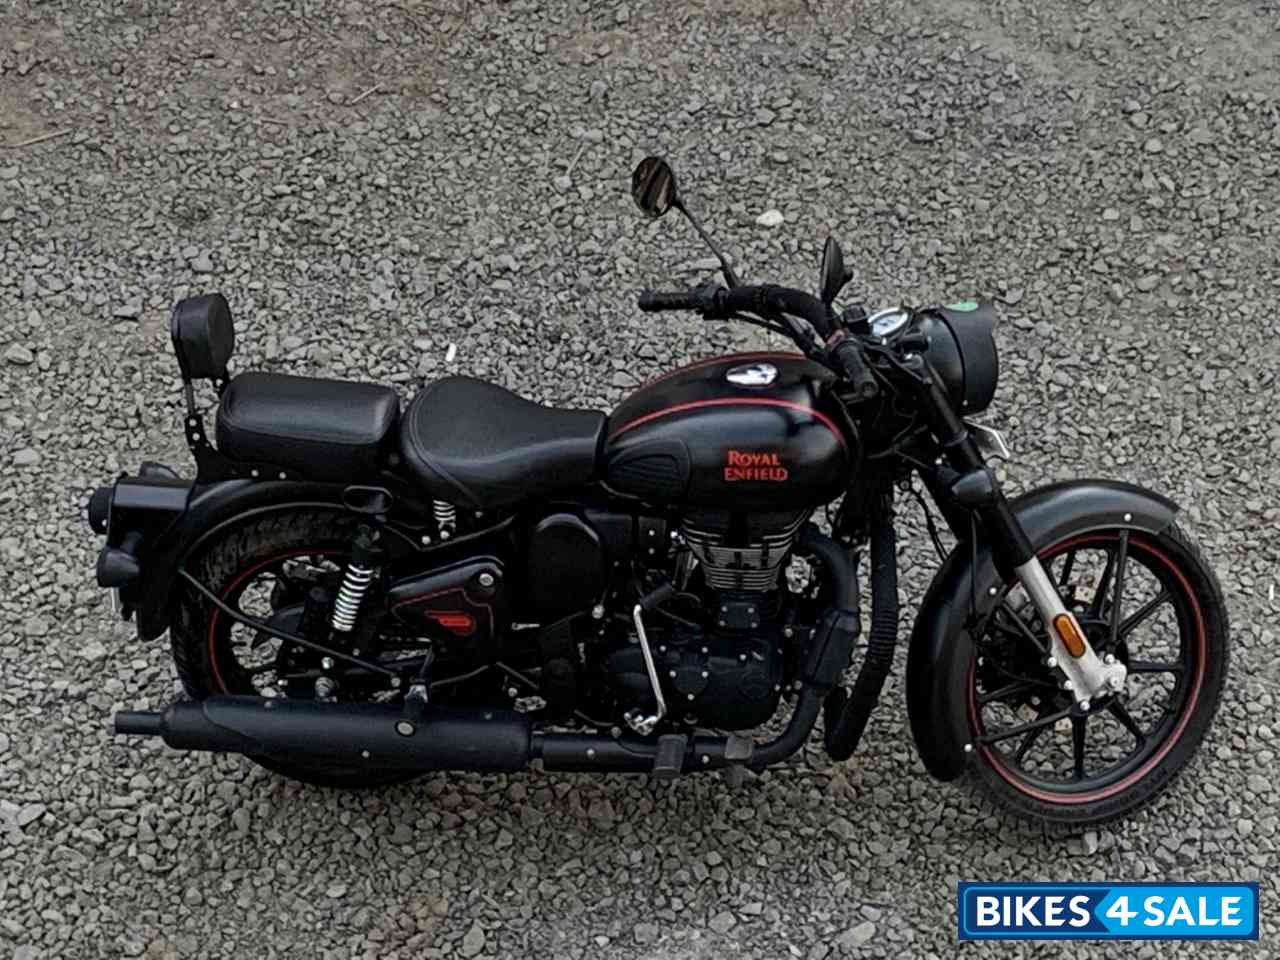 Used 2020 model Royal Enfield Classic 350 BS VI for sale in Chennai. ID